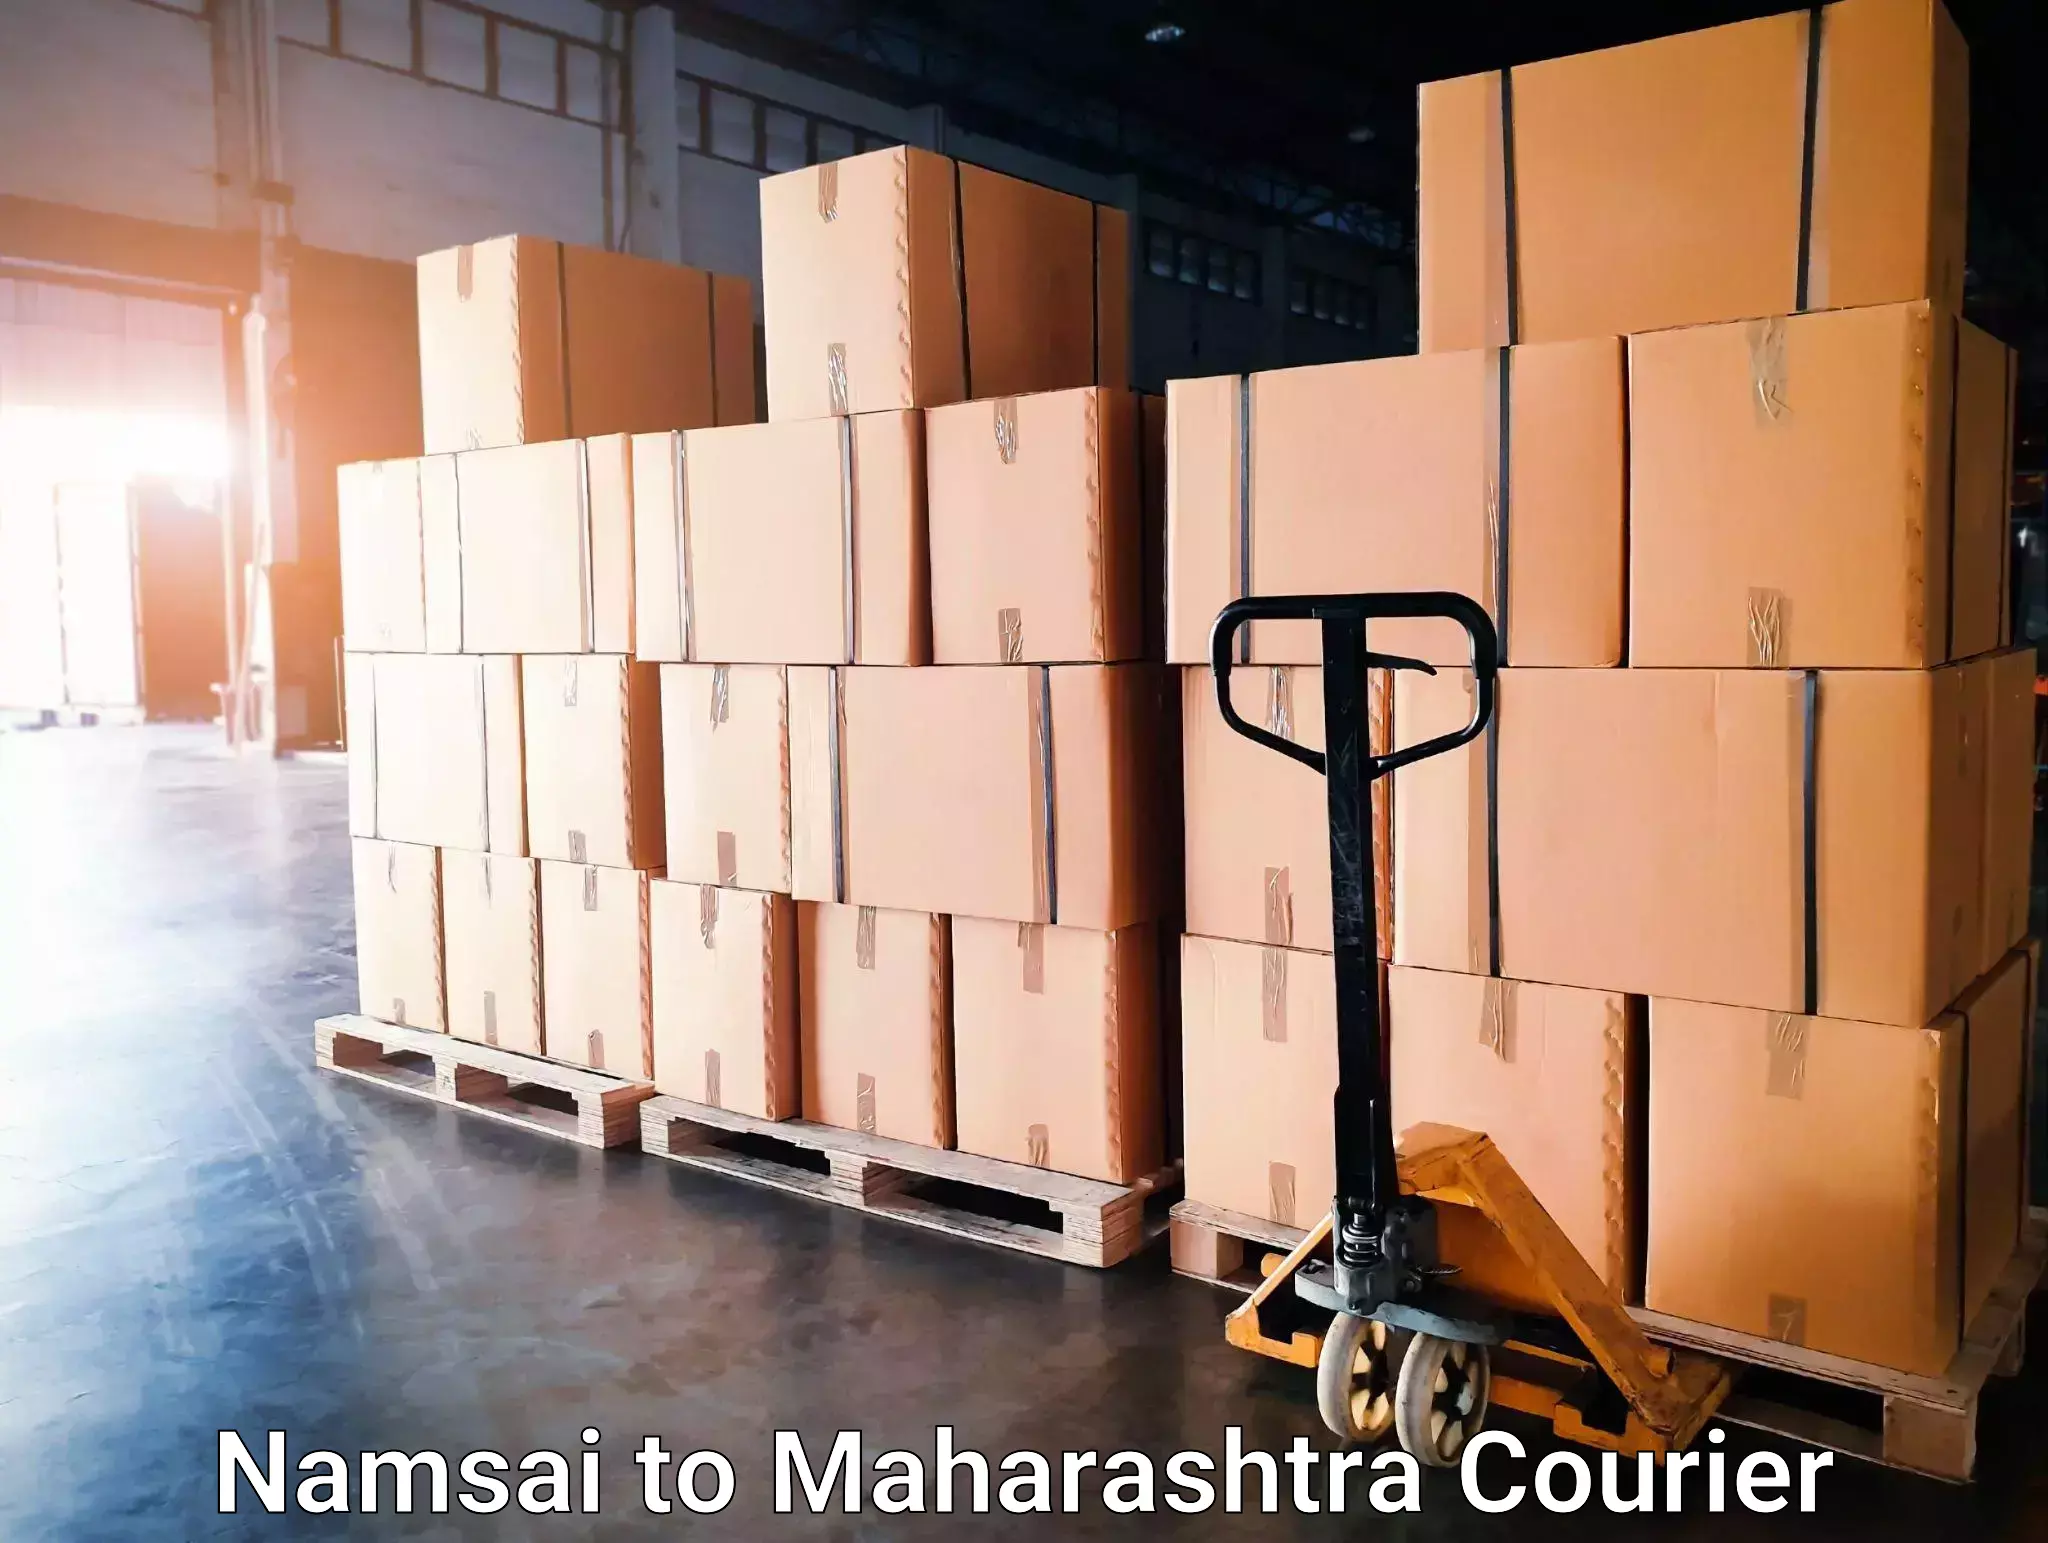 Express delivery capabilities Namsai to Kalbadevi